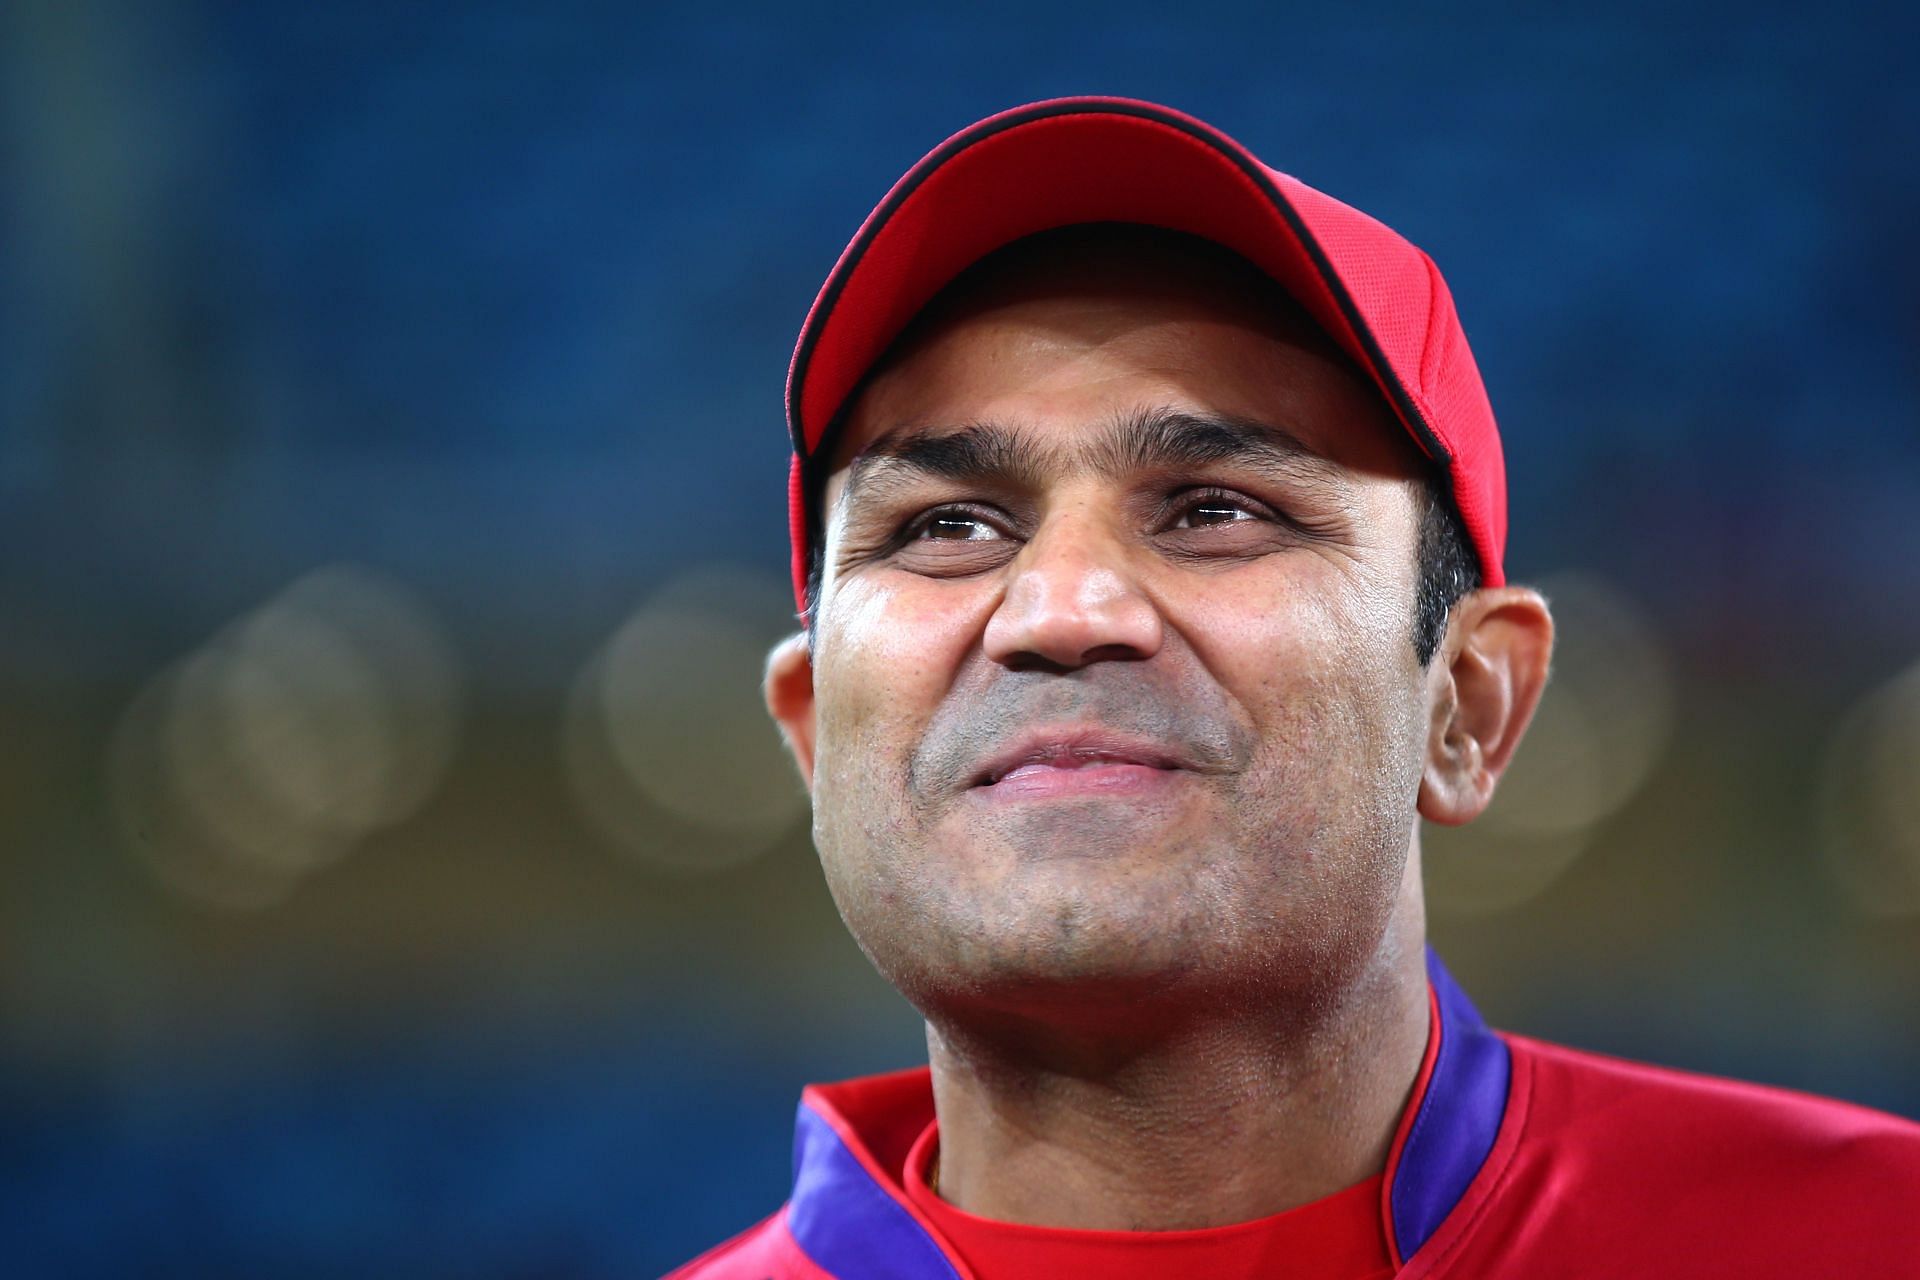 Virender Sehwag has played in the Masters Champions League and Road Safety World Series (Image: Getty)